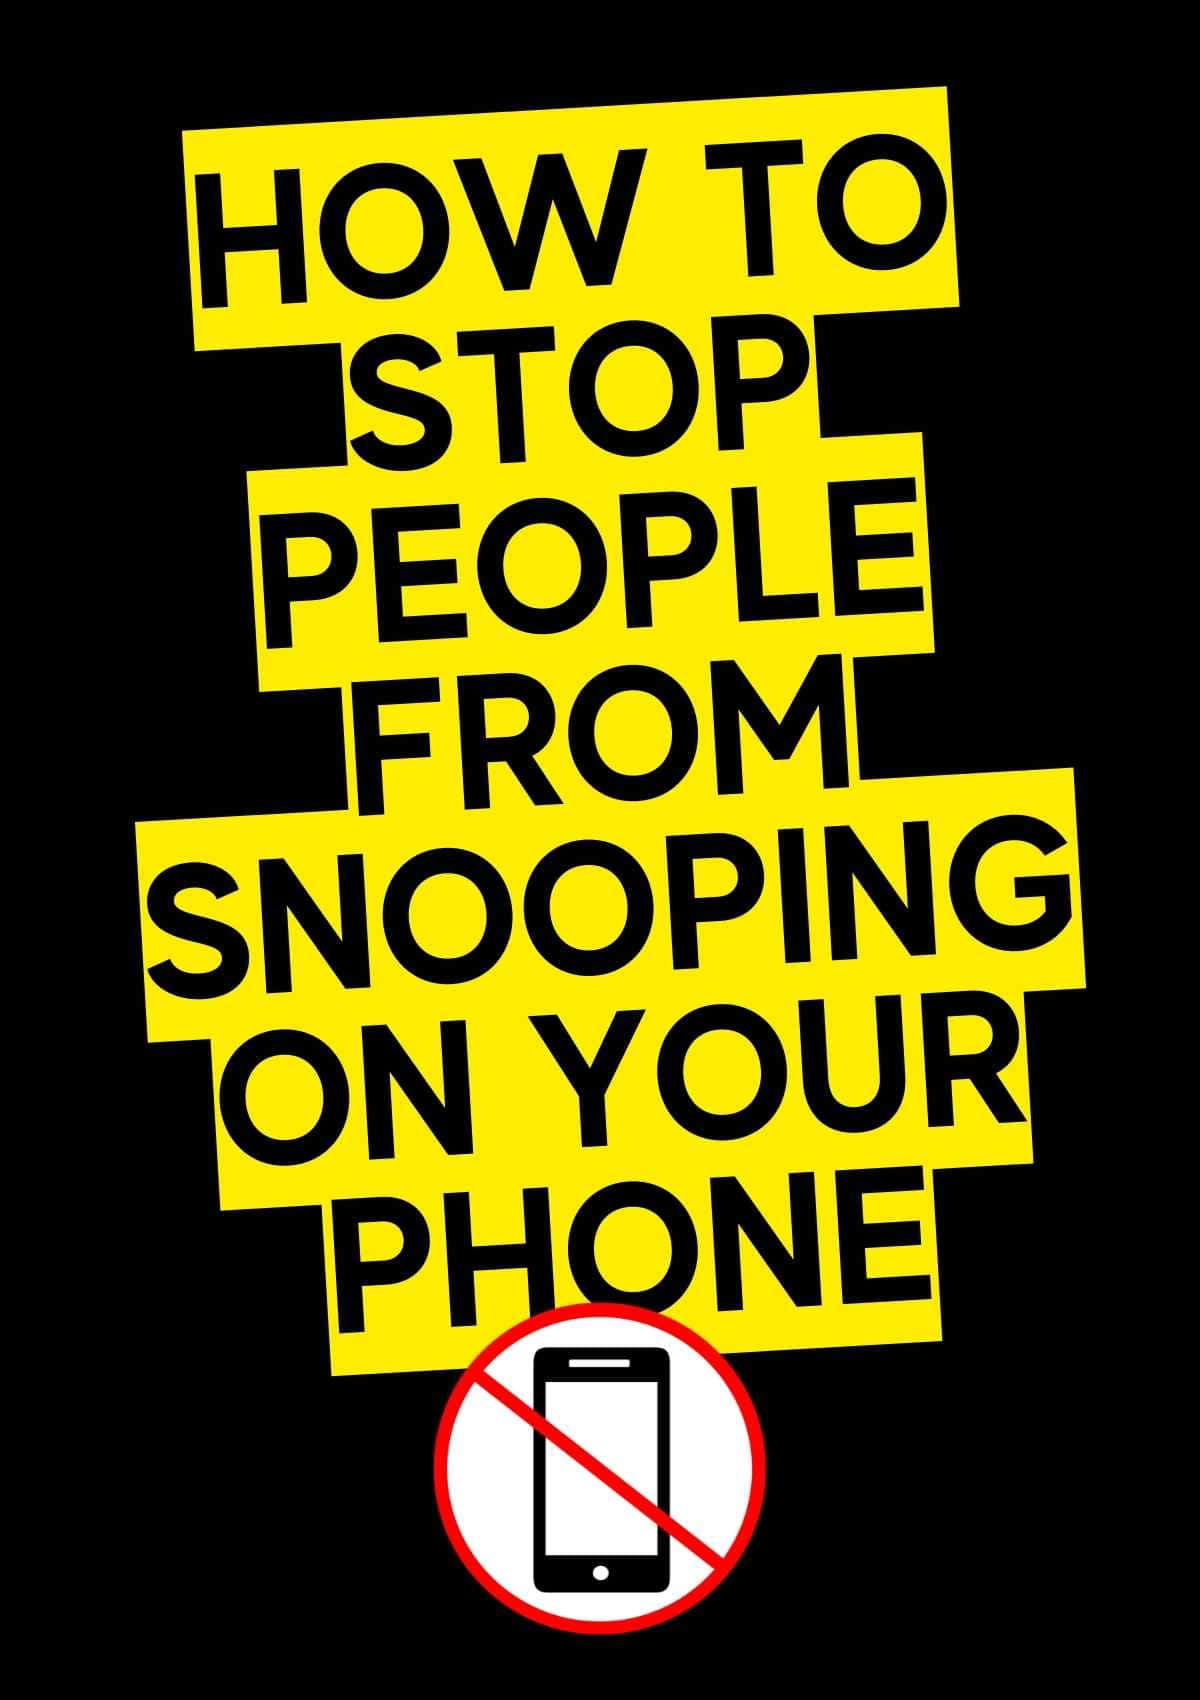 How To Stop People From Snooping On Your Phone Background